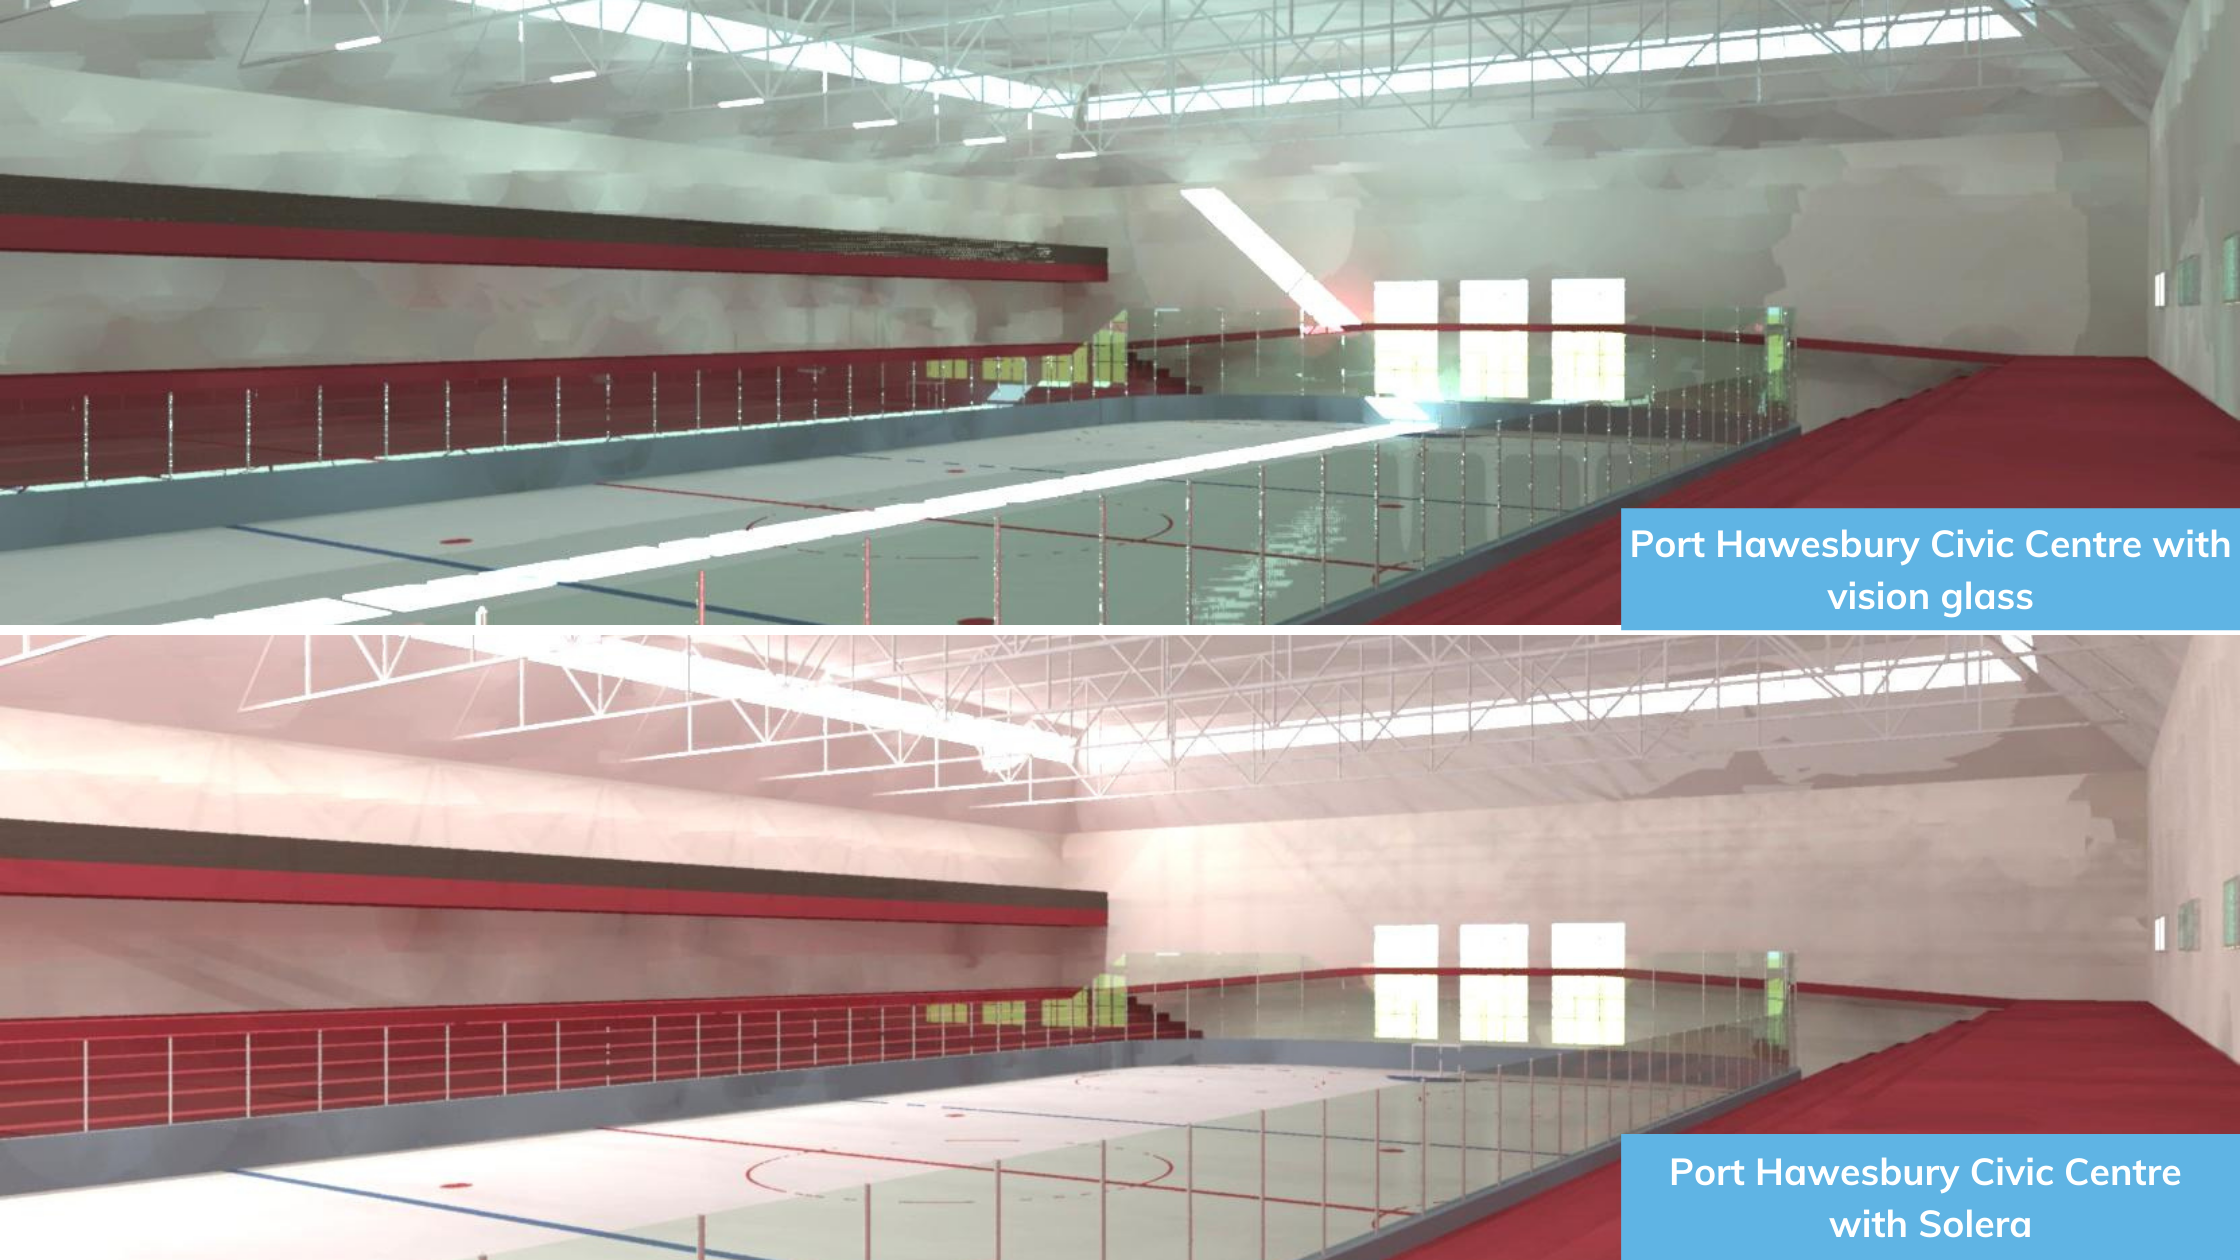 Port Hawesbury Civic Centre daylight models with vision glass top and Solera engineered daylight diffusers bottom. 